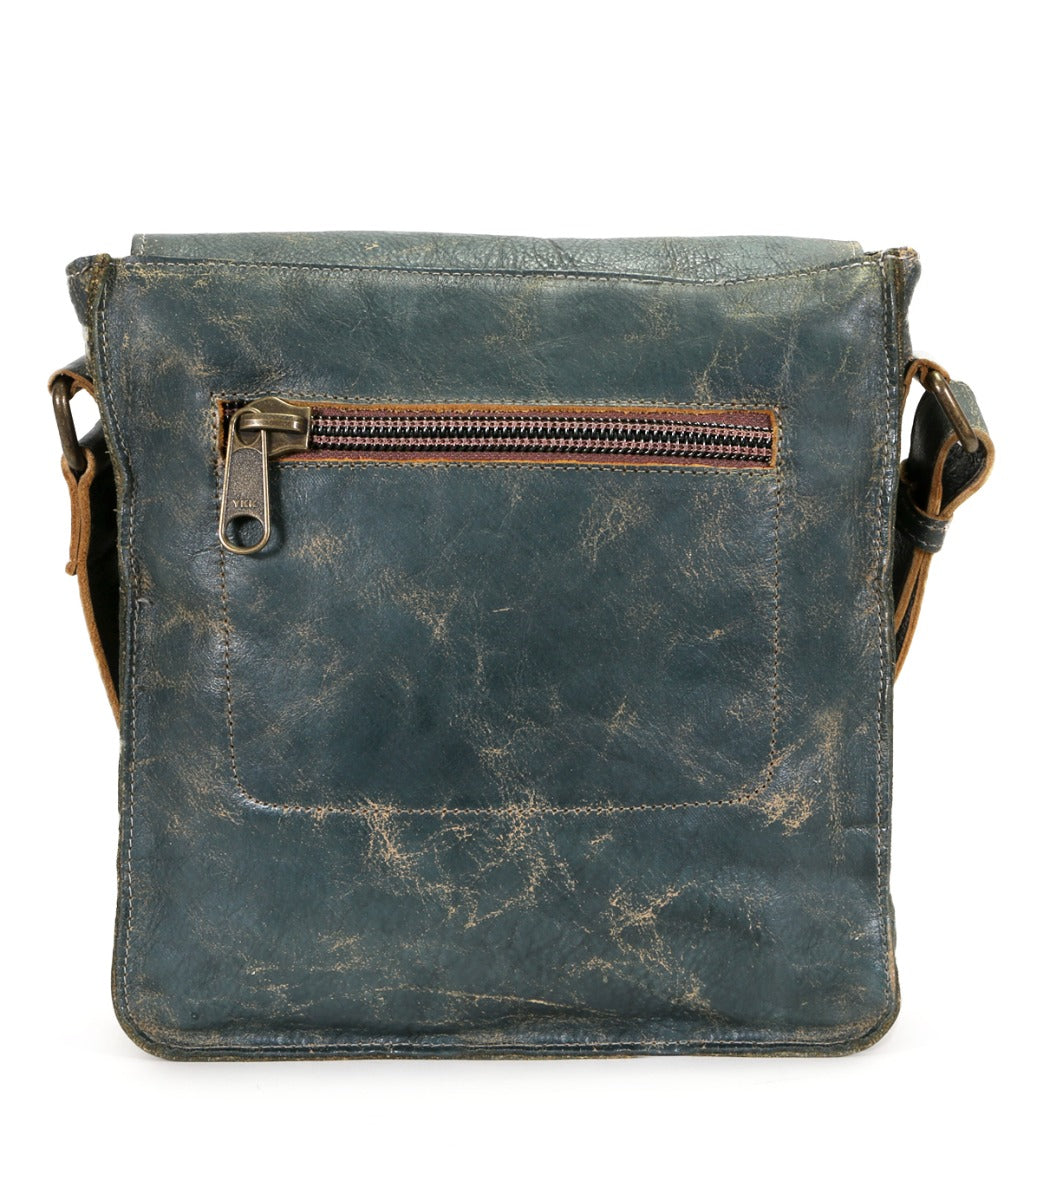 A Venice Beach teal leather messenger bag with zippered compartment, made by Bed Stu.